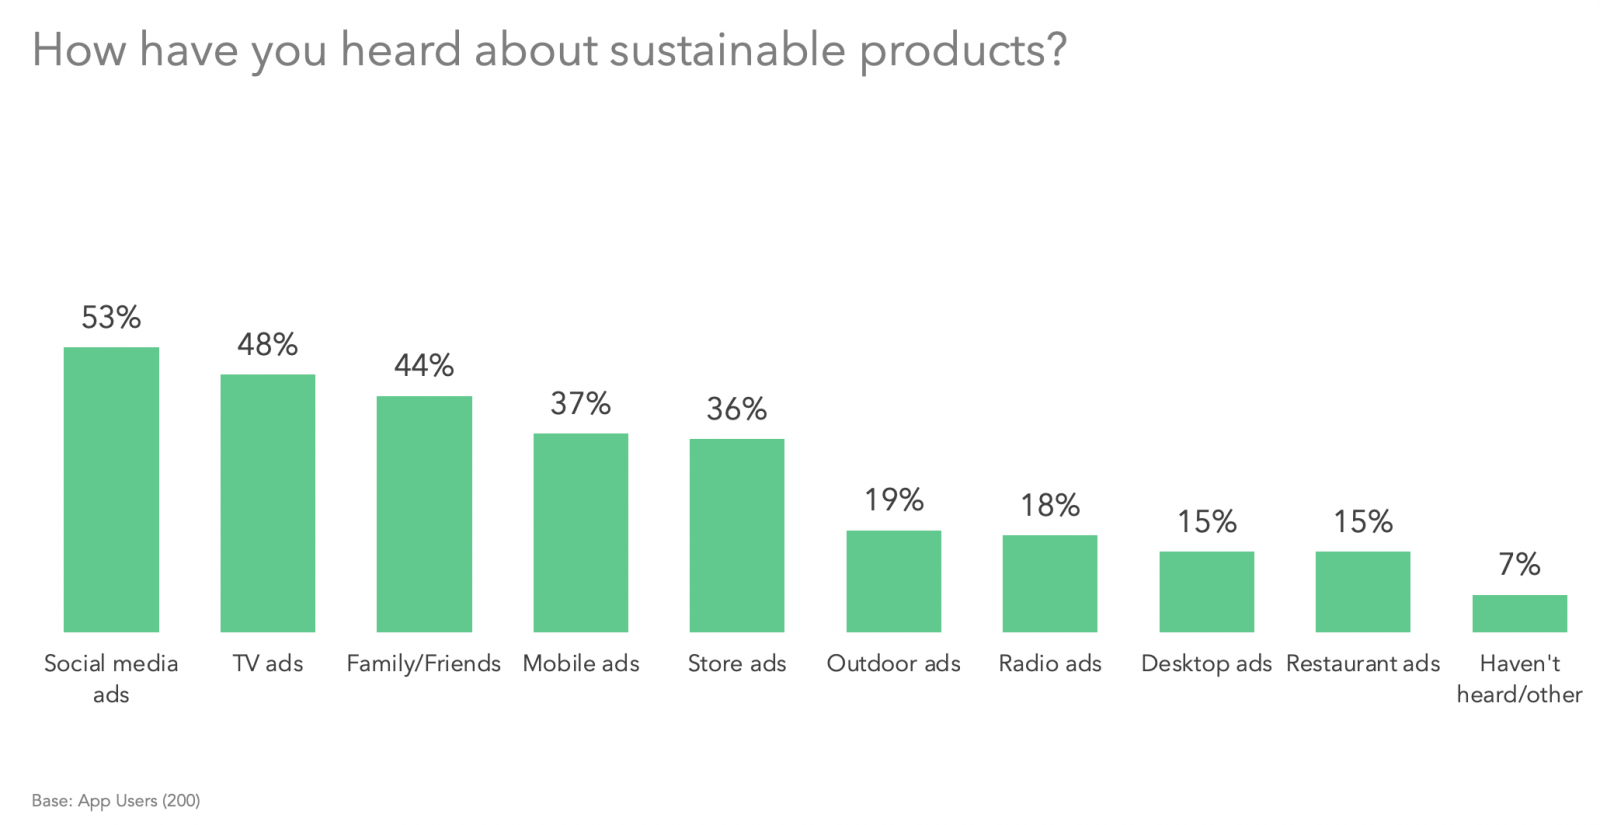 How have you heard about sustainable products?